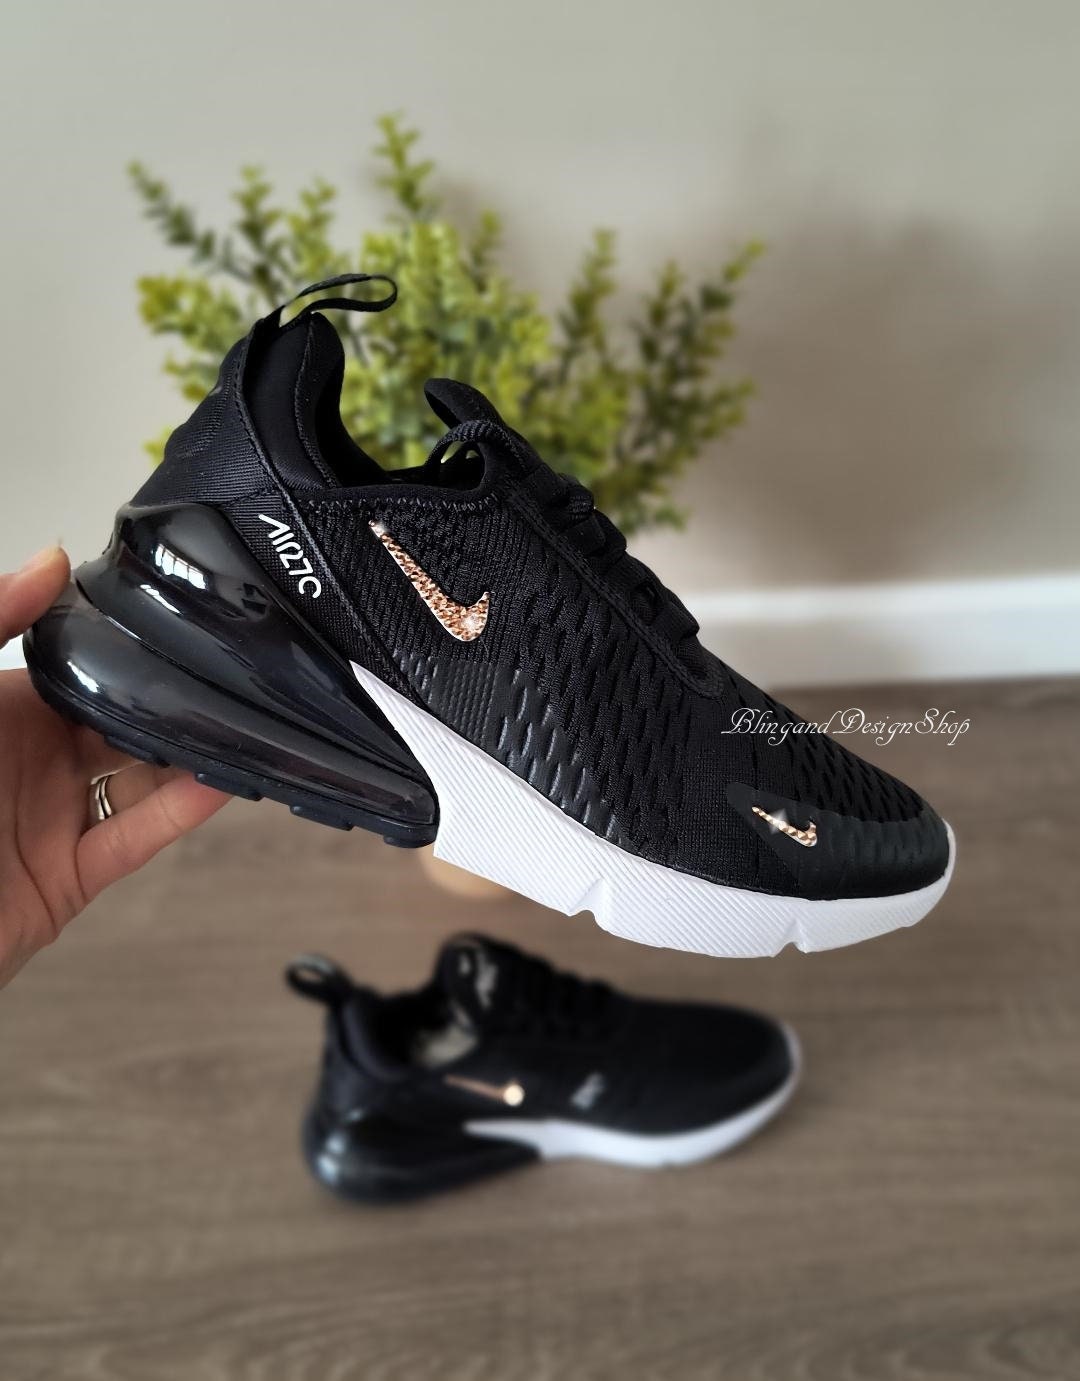 Swarovski Women's Nike Air Max 270 White & Black Sneakers Blinged Out with Authentic Clear Swarovski Crystals Custom Bling Nike Shoes